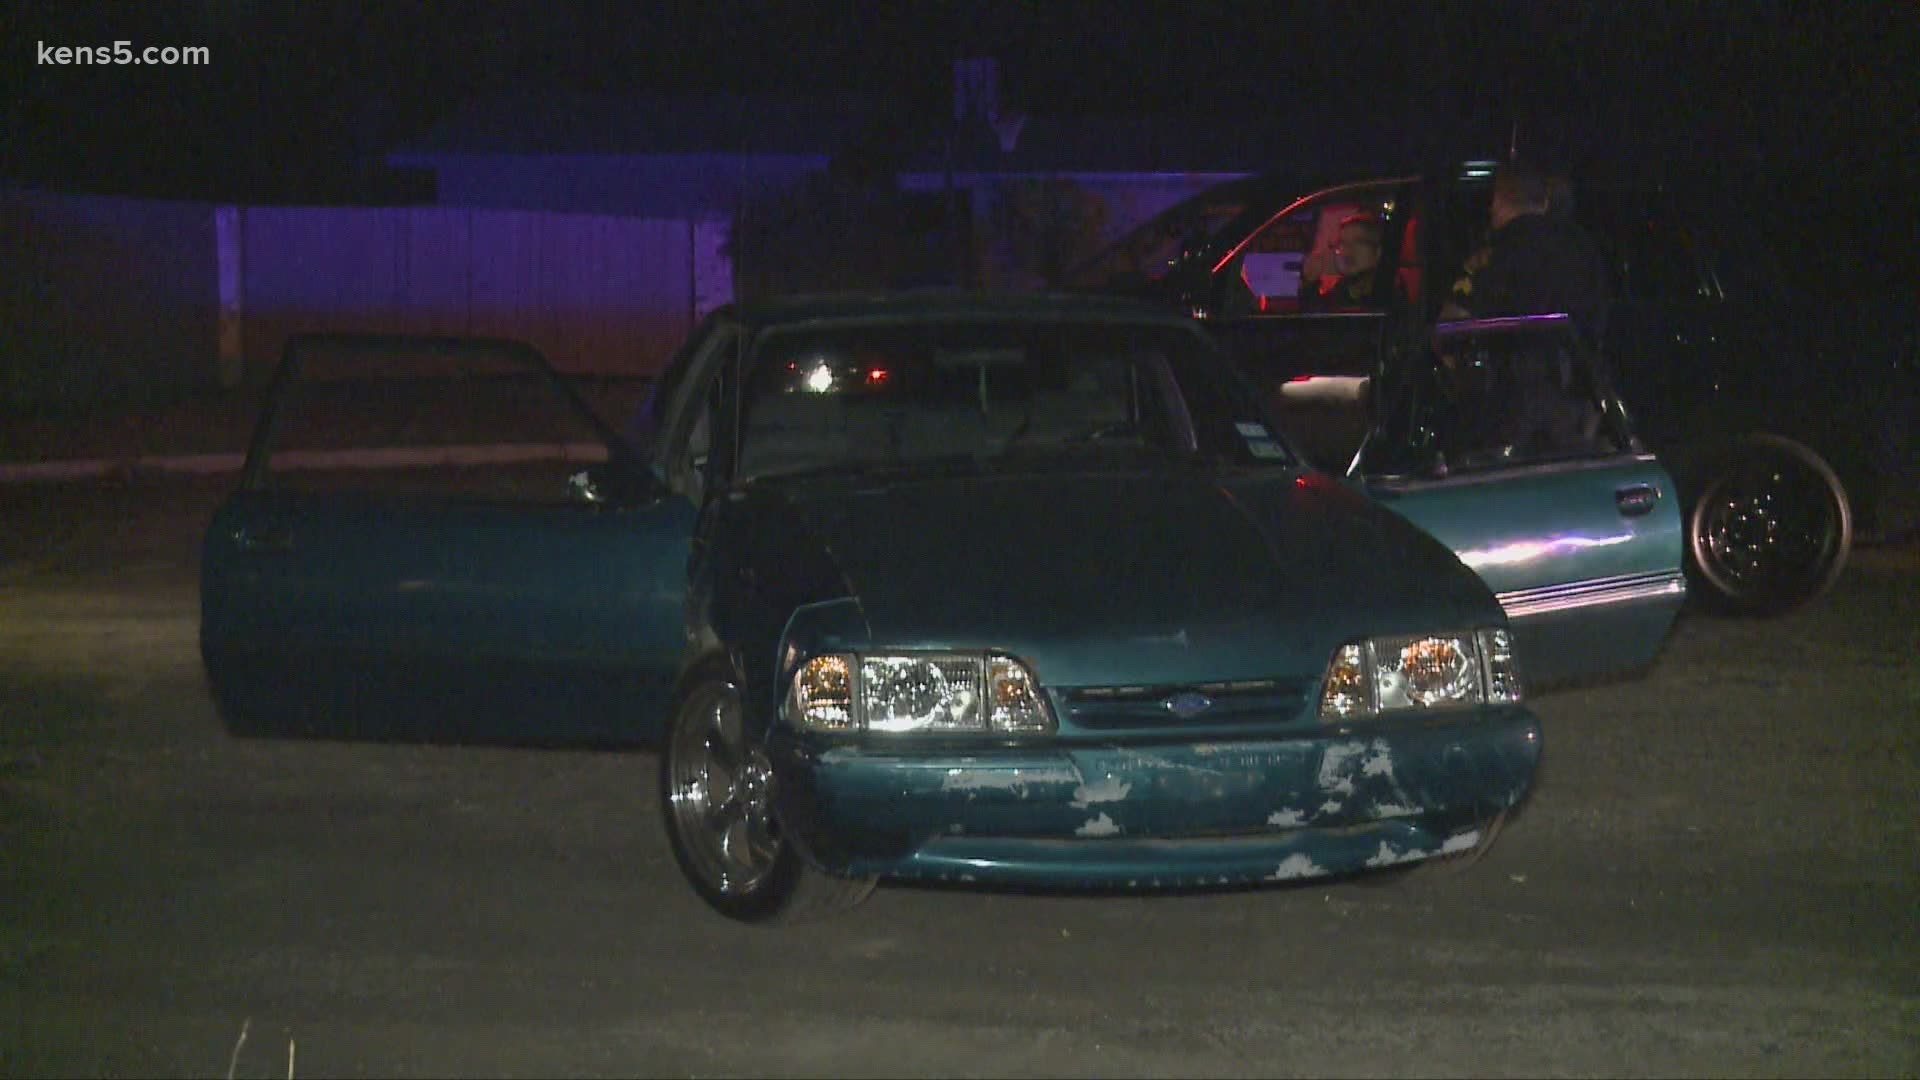 A car thief led Bexar County deputies in a chase on the city's south side, authorities said